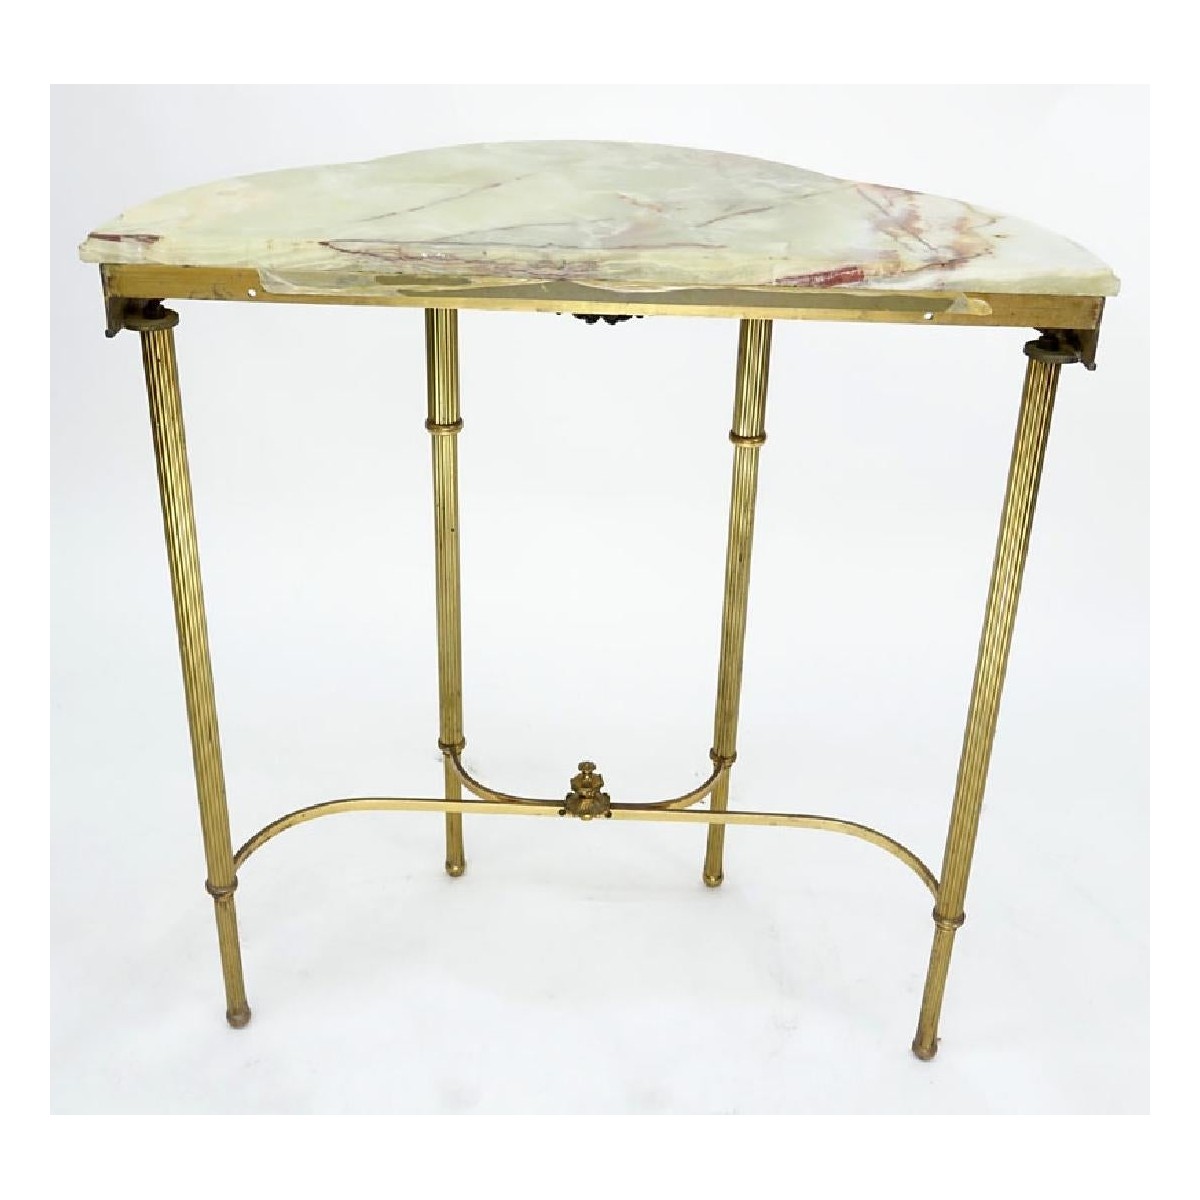 20th C. Neoclassical Style Console Table